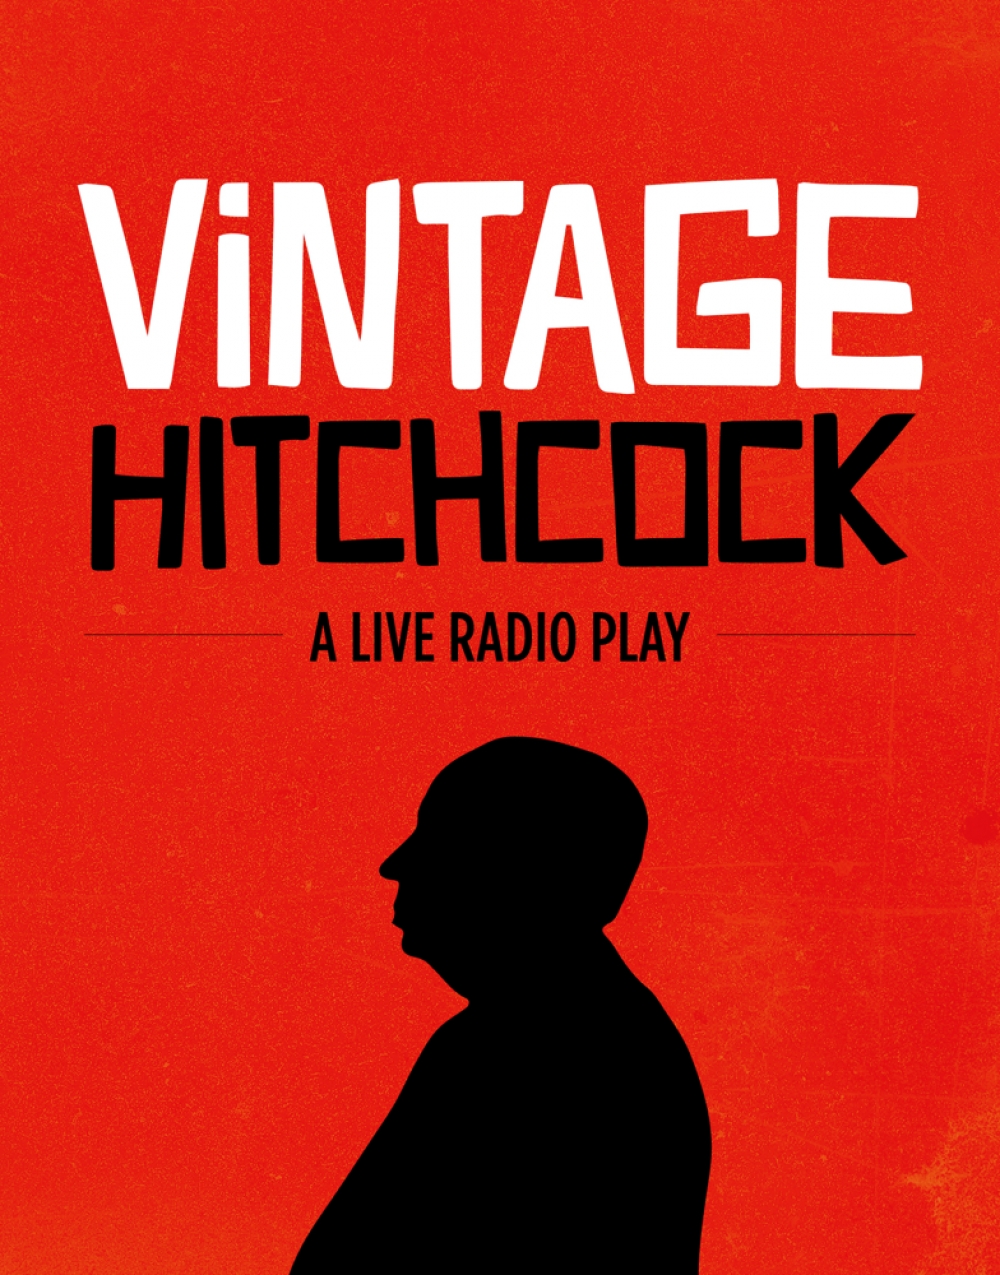 Vintage Hitchcock: a Radio Play - the Contemporary Theatre Studies Program at Shepherd University Stage Mag